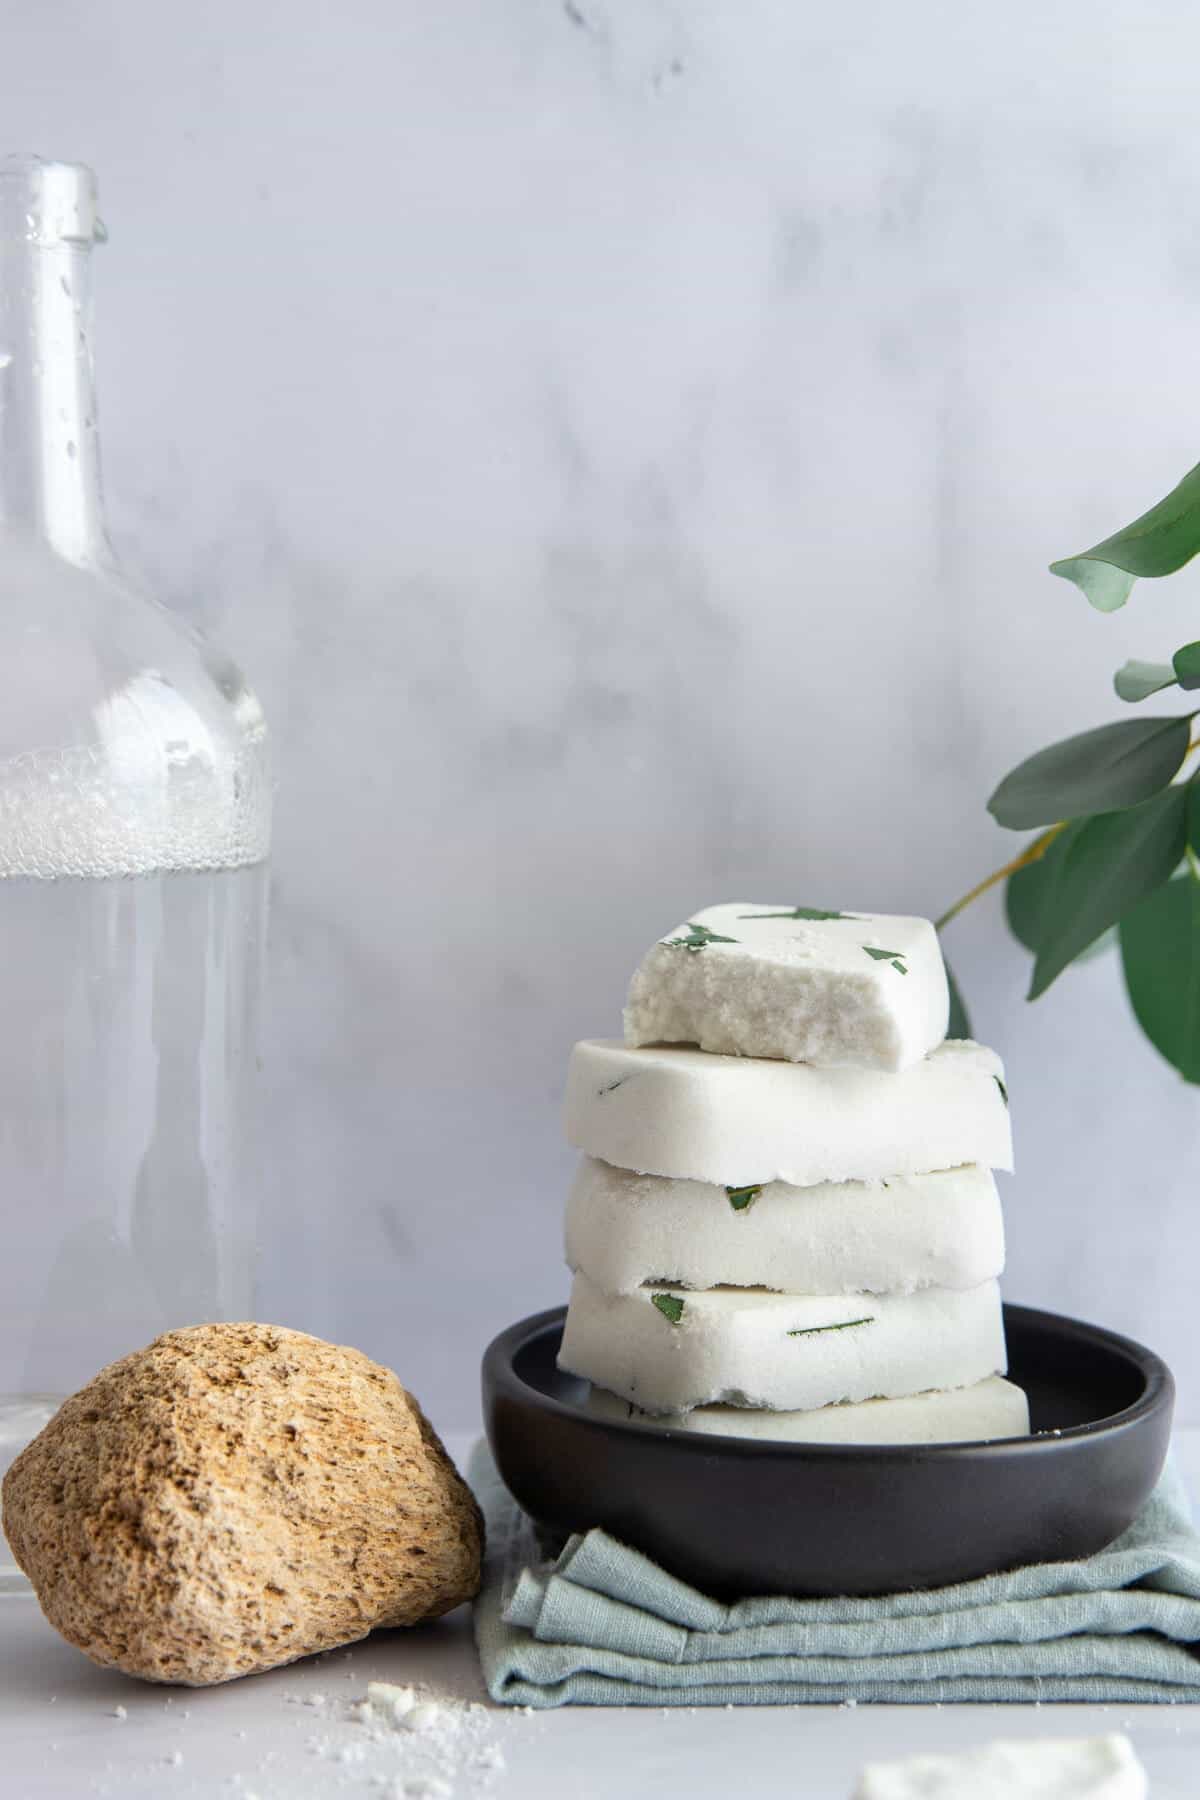 How to make eucalyptus shower steamers and bath bombs for congestion relief